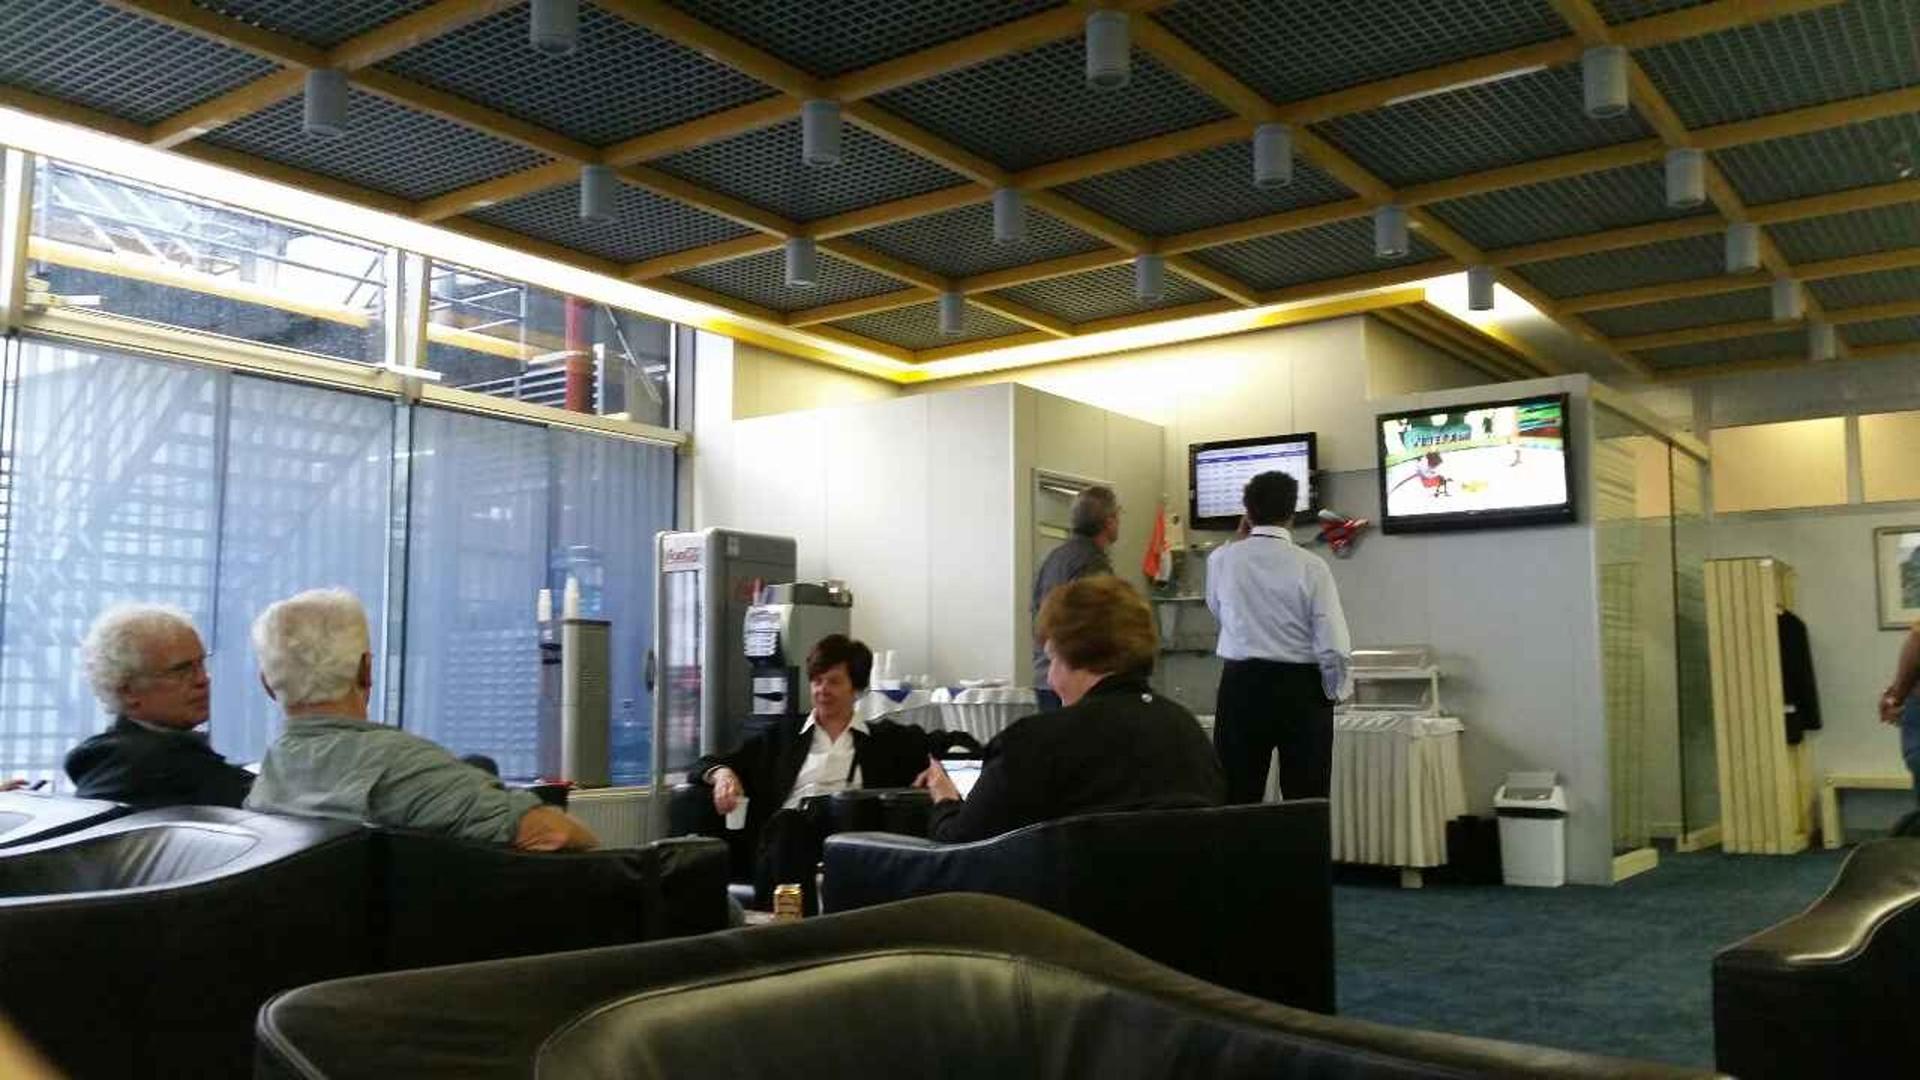 Split Airport Business Lounge image 3 of 6